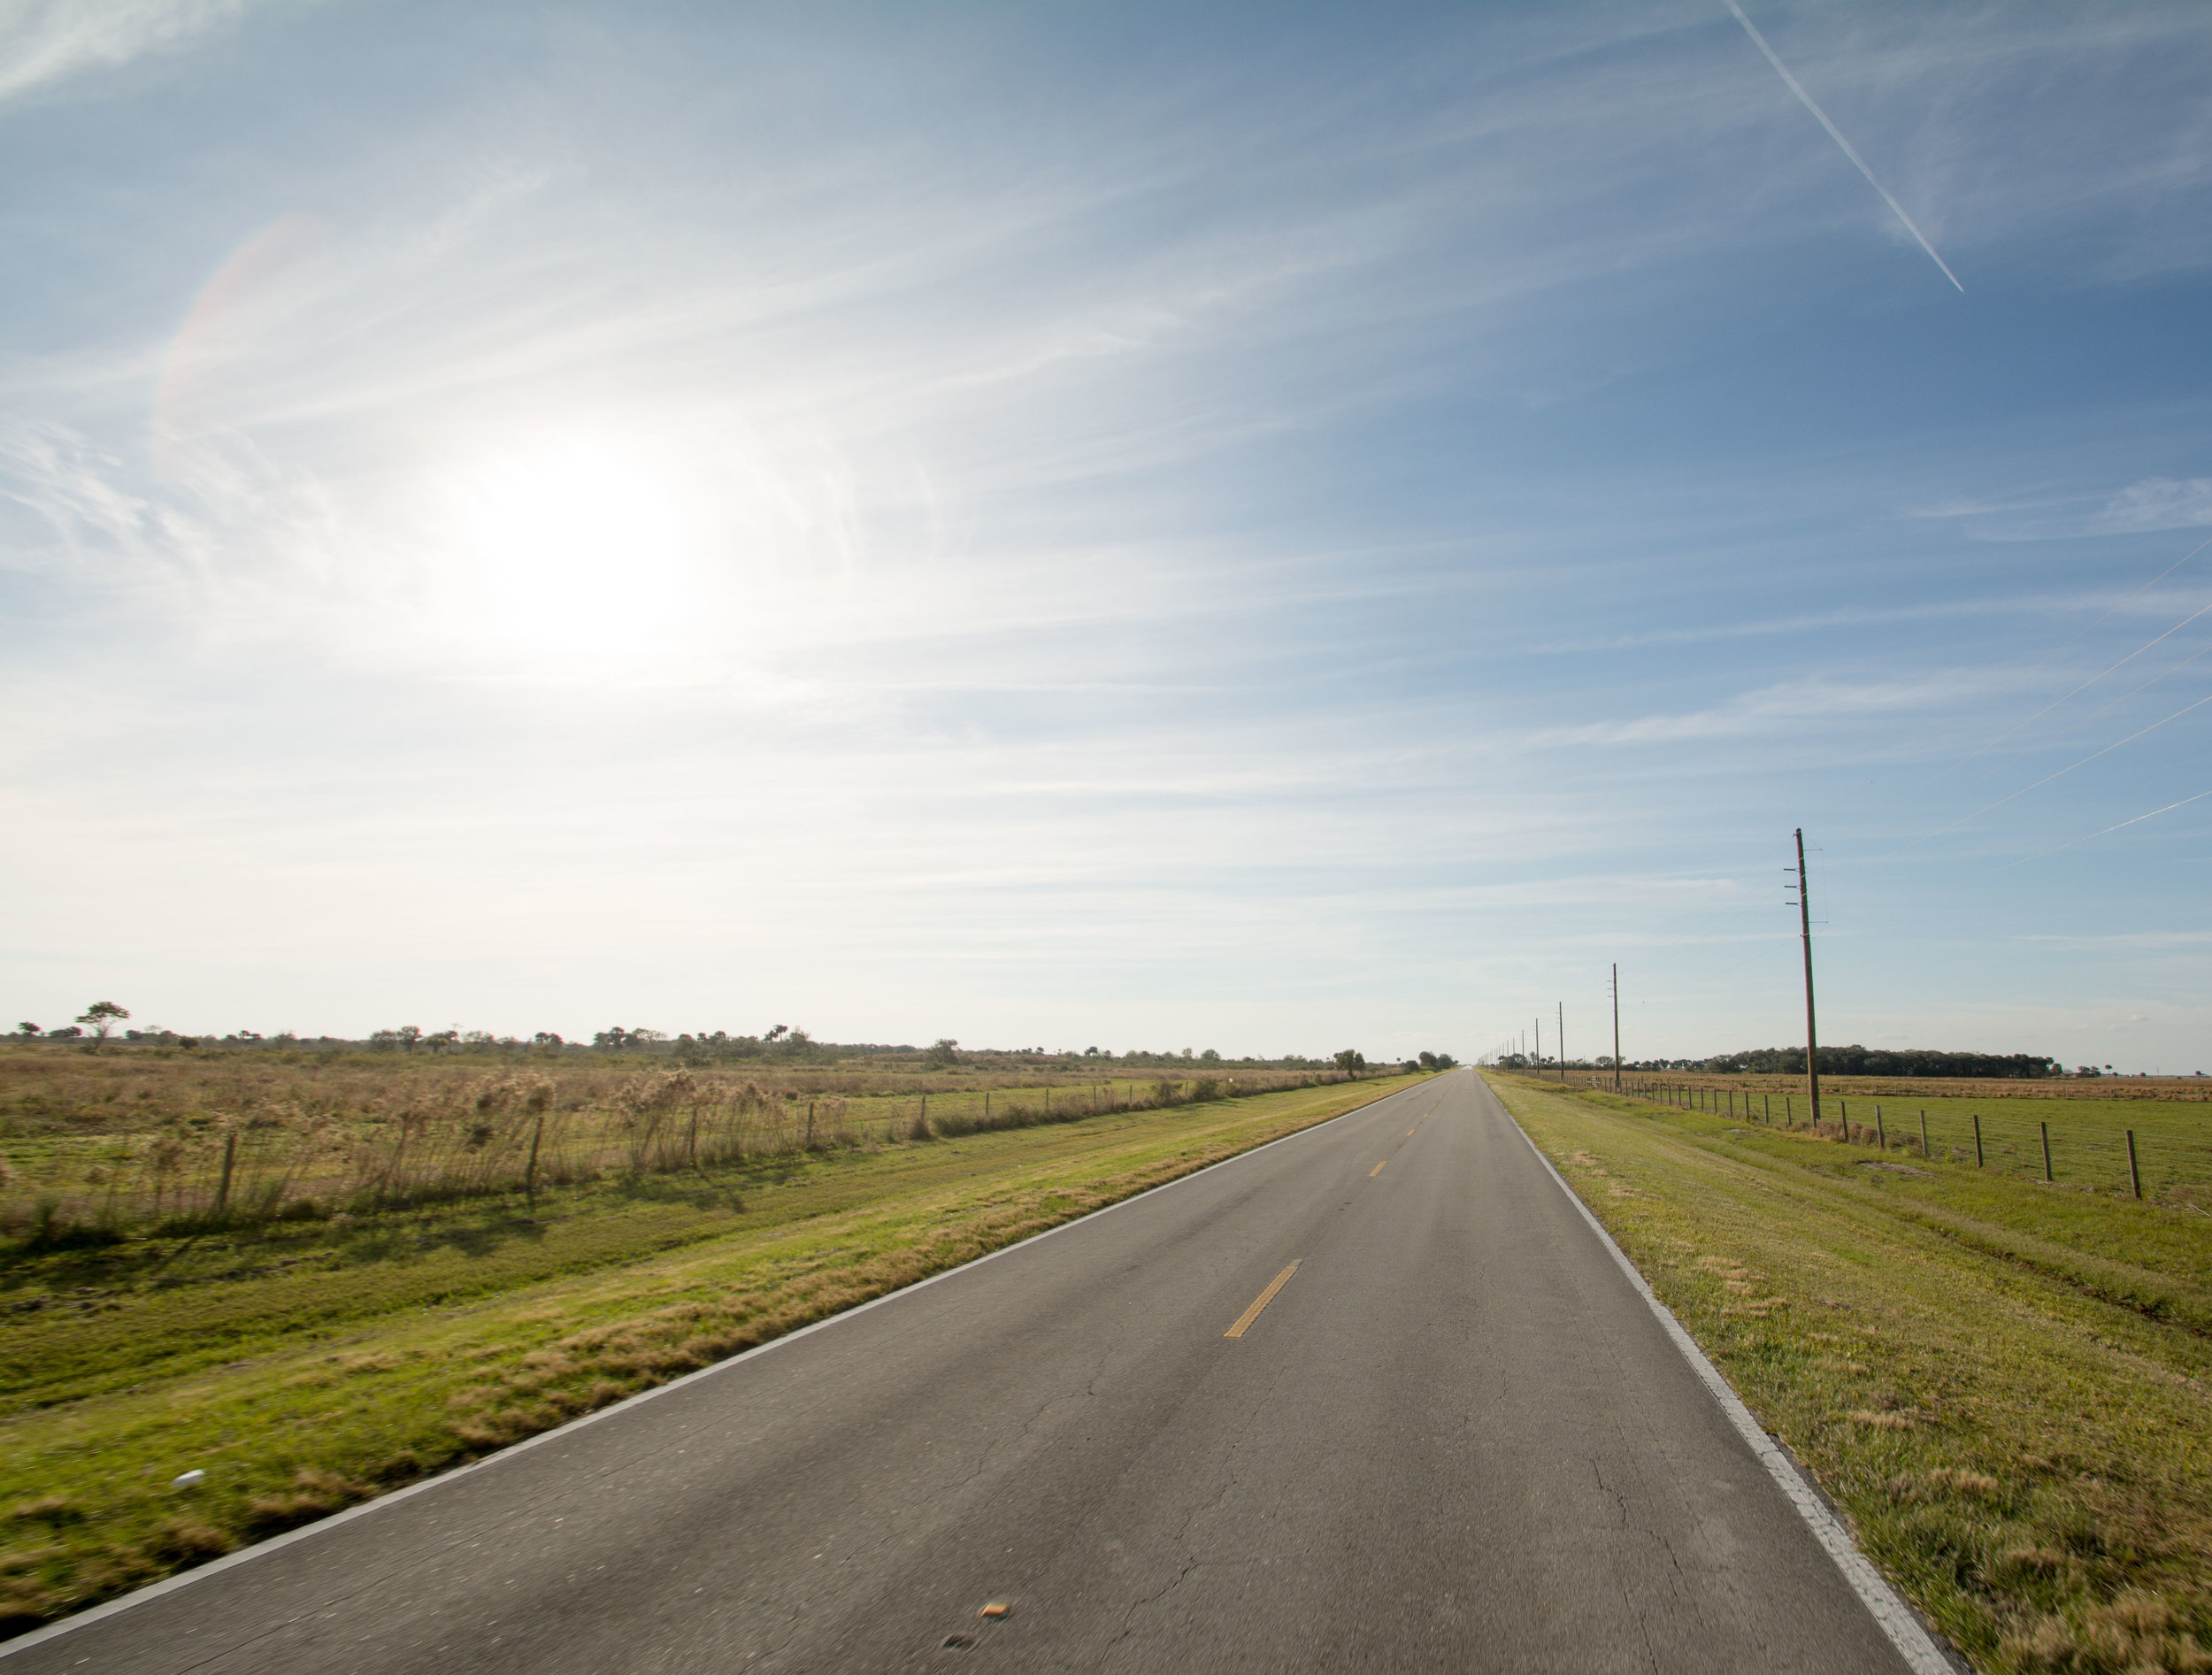  As development encroaches on rural land, it becomes harder to find two-lane roads surrounded by farm land in much of Florida.&nbsp; 